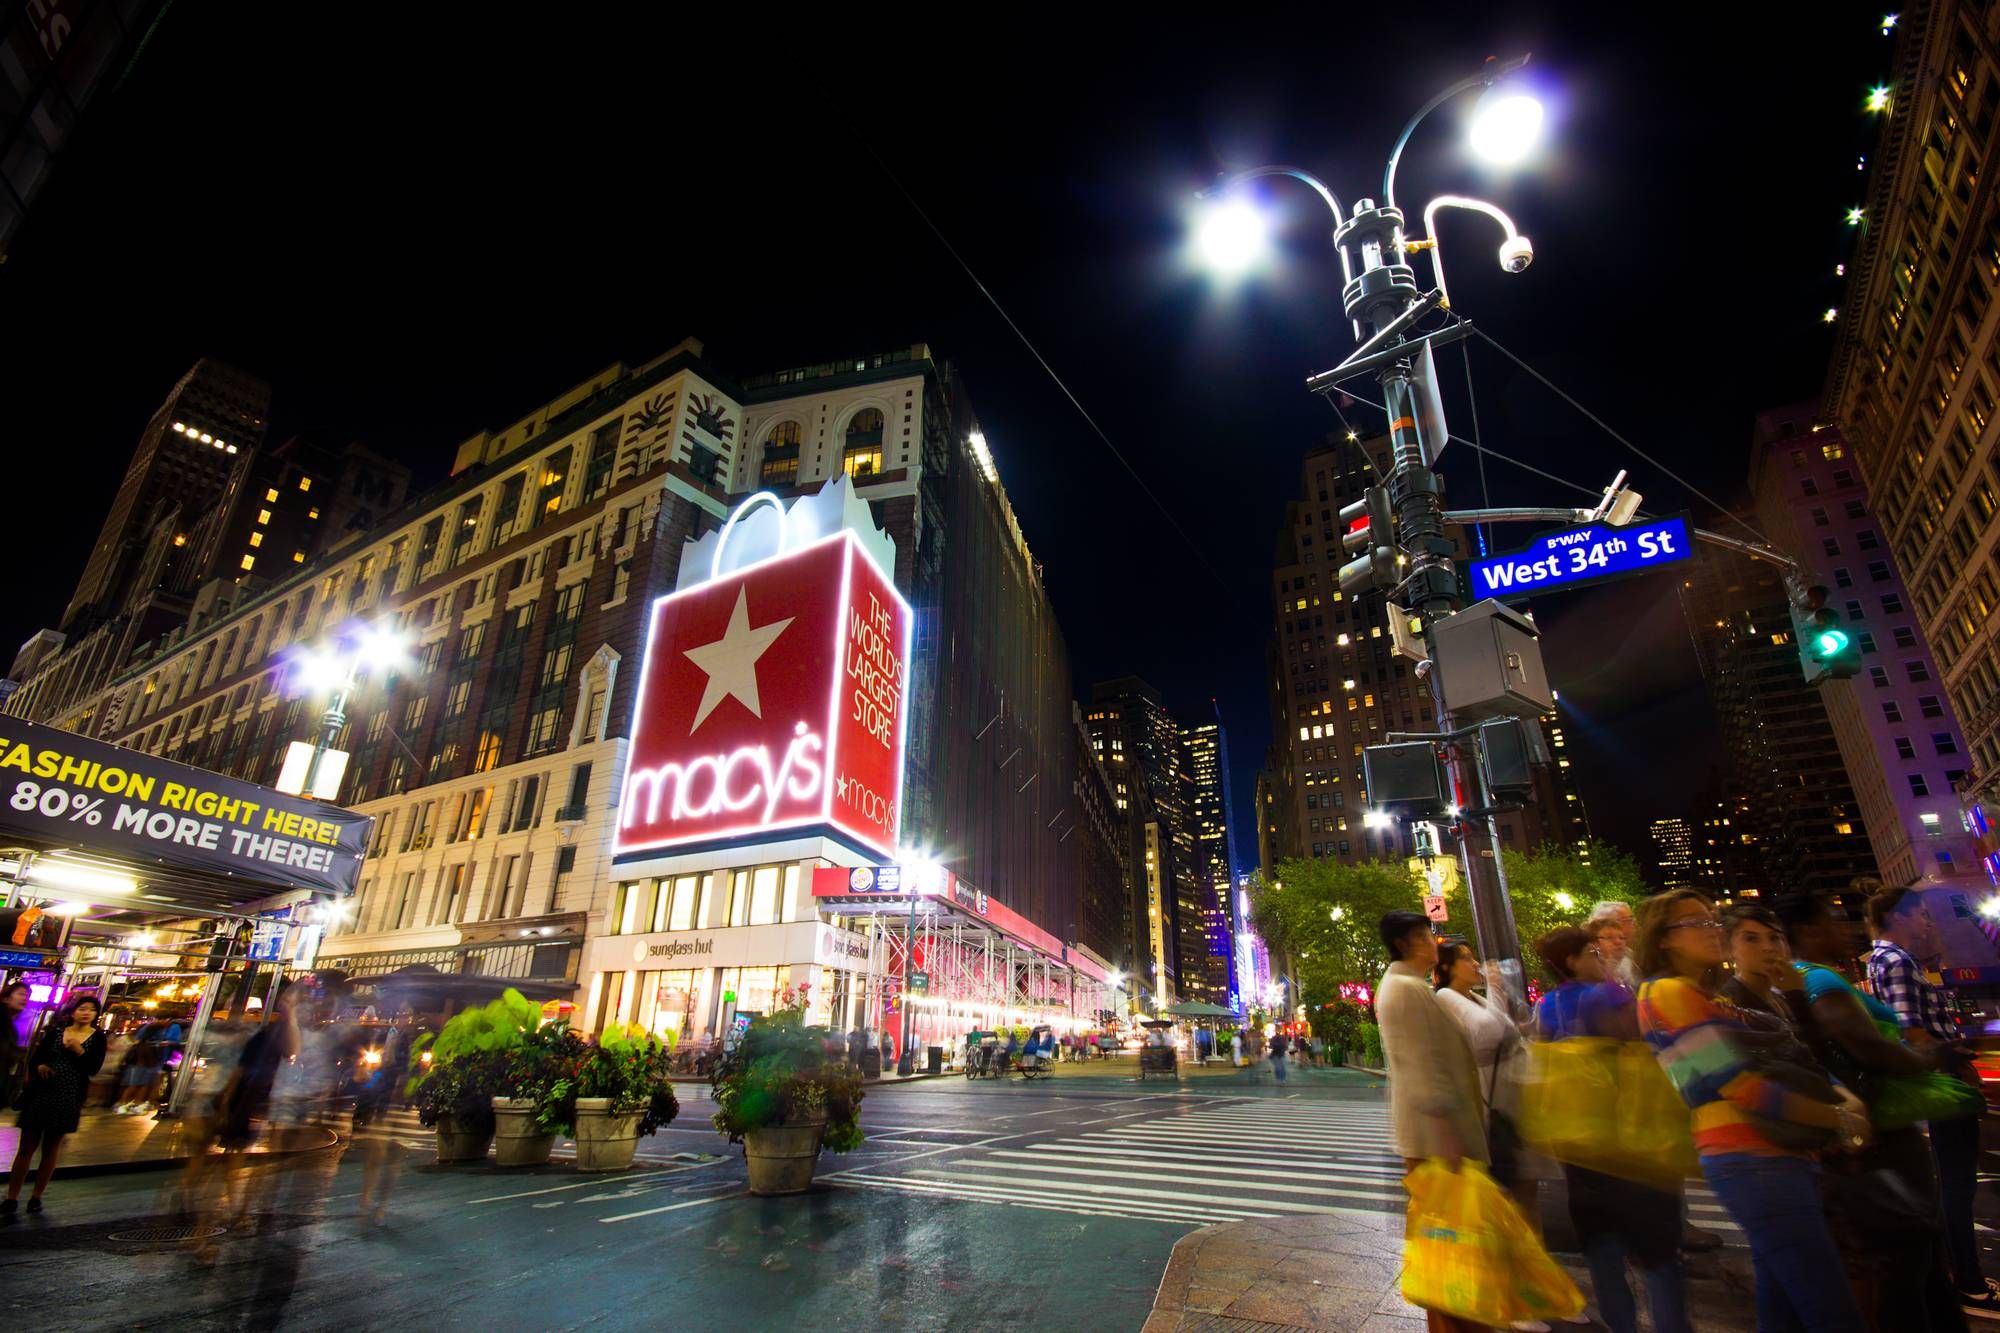 Macy's was the victim of a data breach in 2019